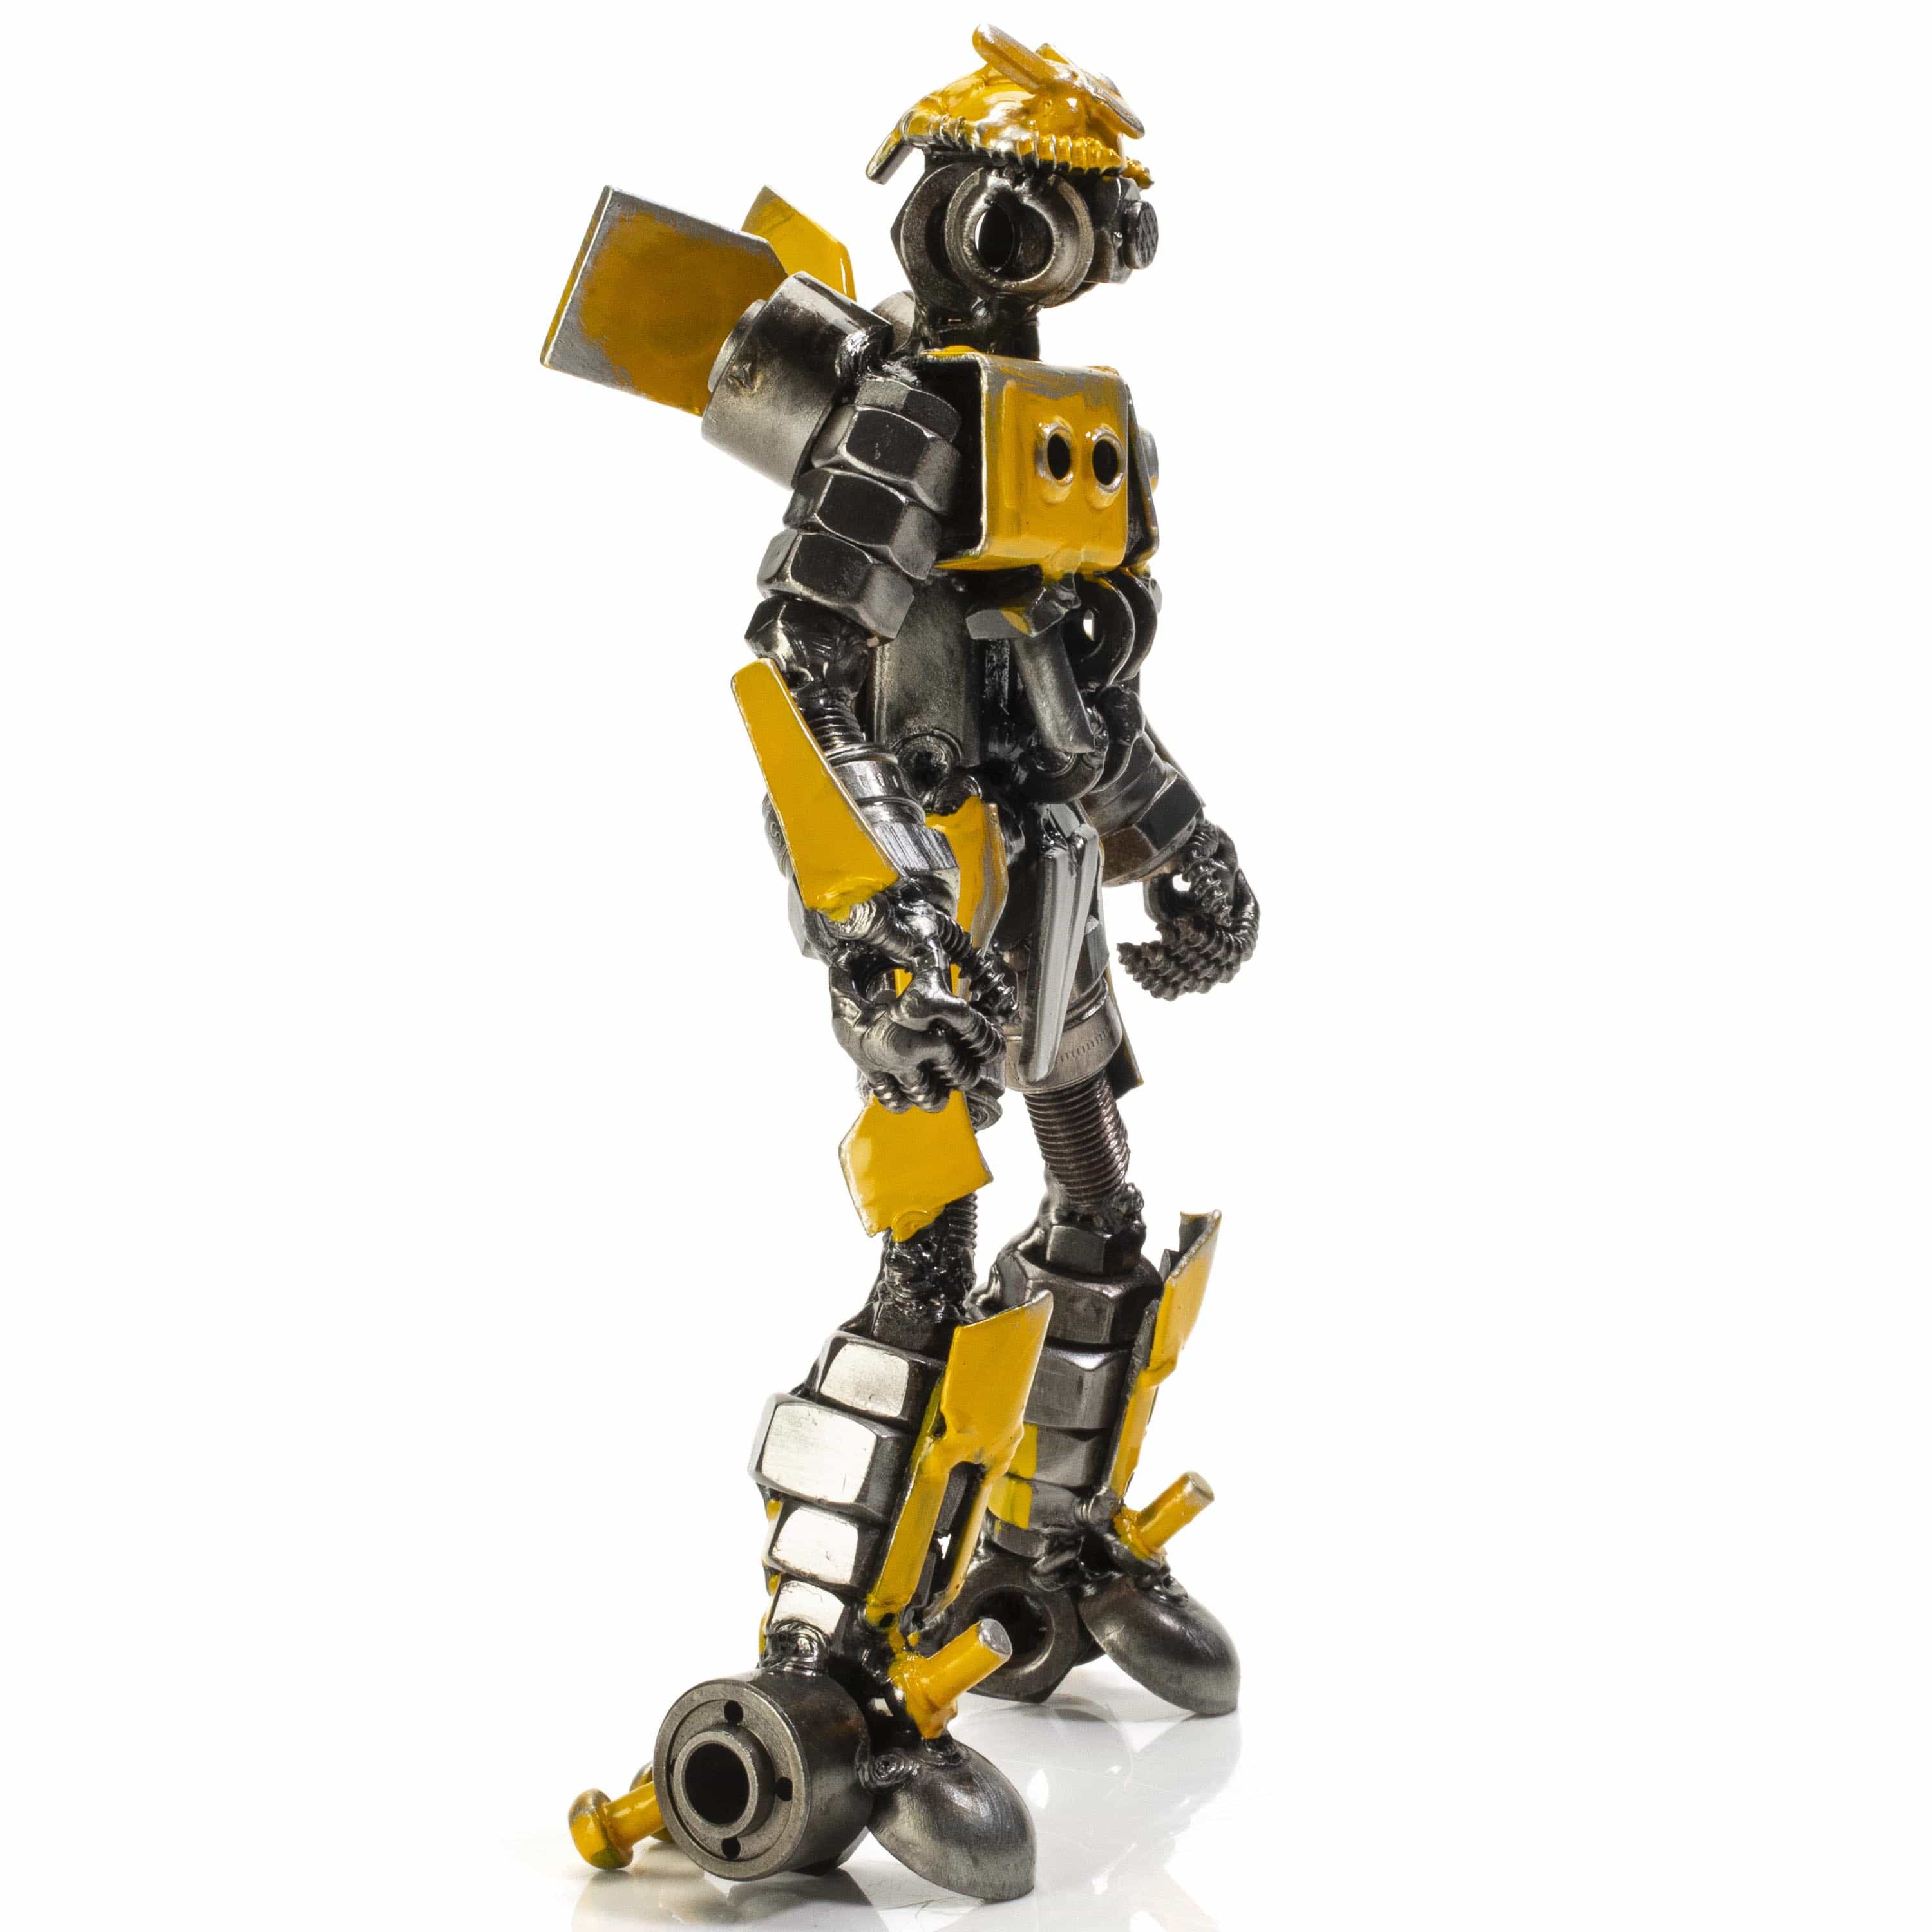 Kalifano Recycled Metal Art Bumblebee Inspired Recycled Metal Sculpture RMS-450BBA-N